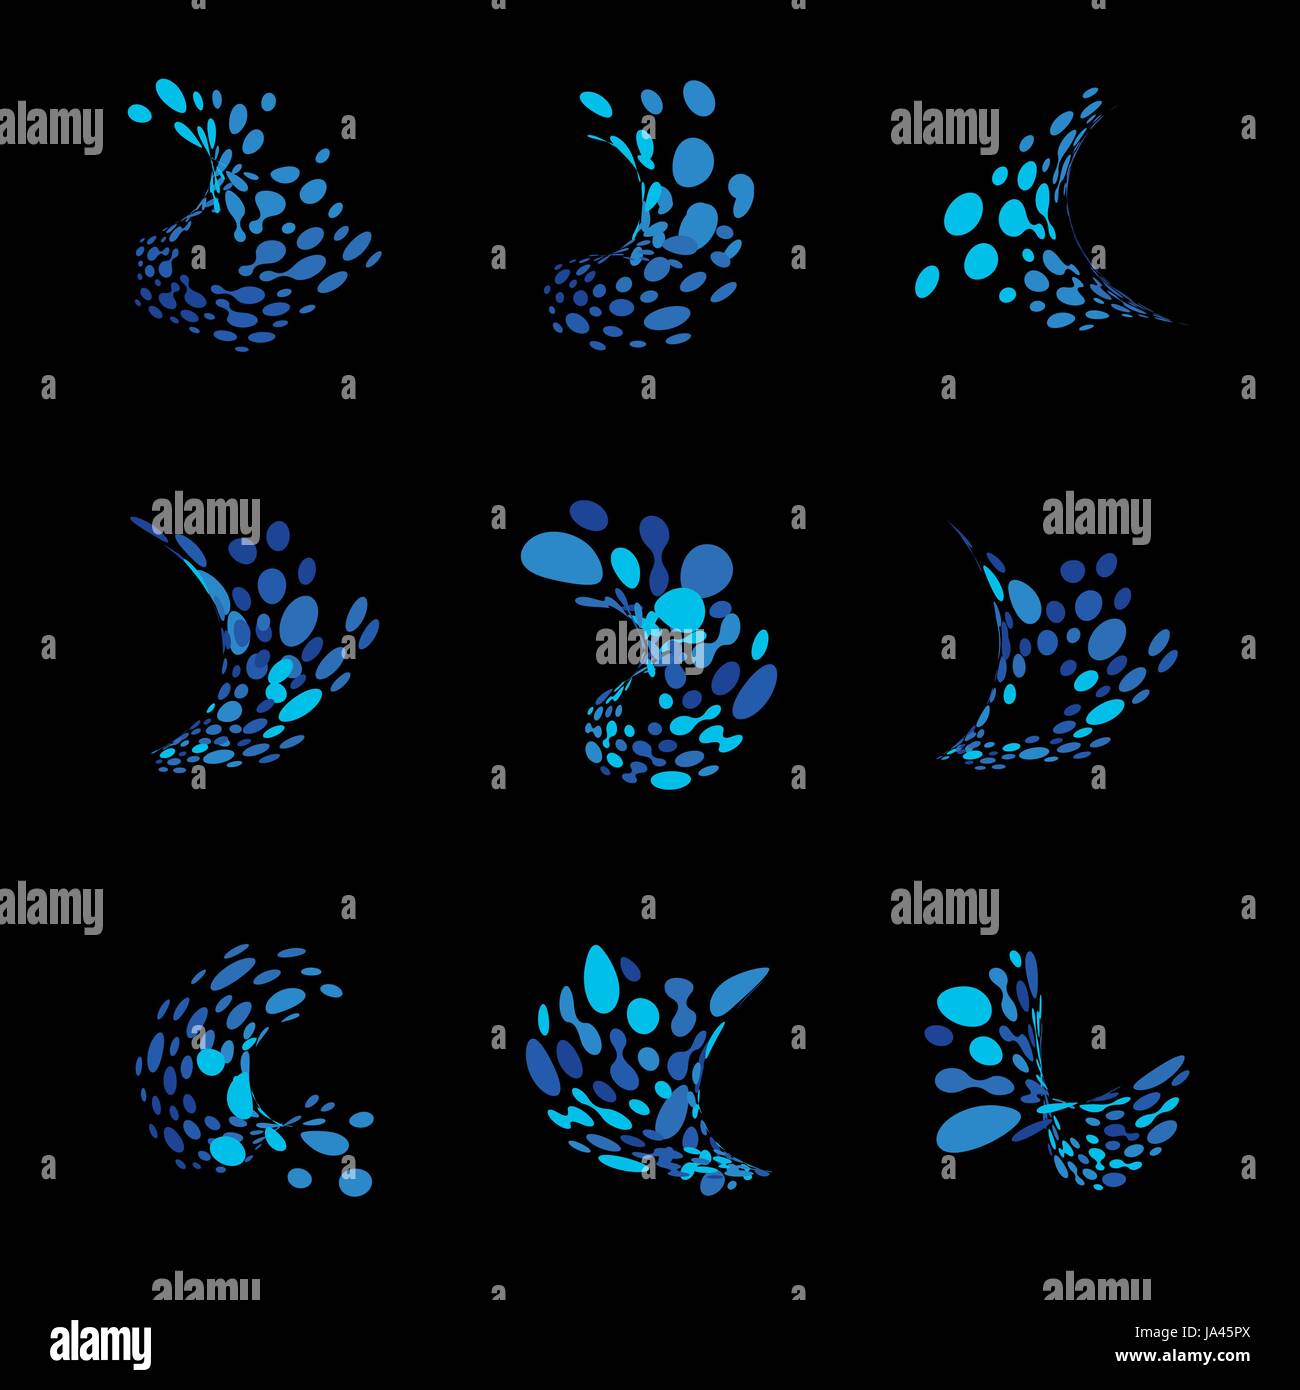 Abstract logos from dots in the form of an ocean wave. Set of blue icons from distorted dots. Liquid splash vector illustration Stock Vector